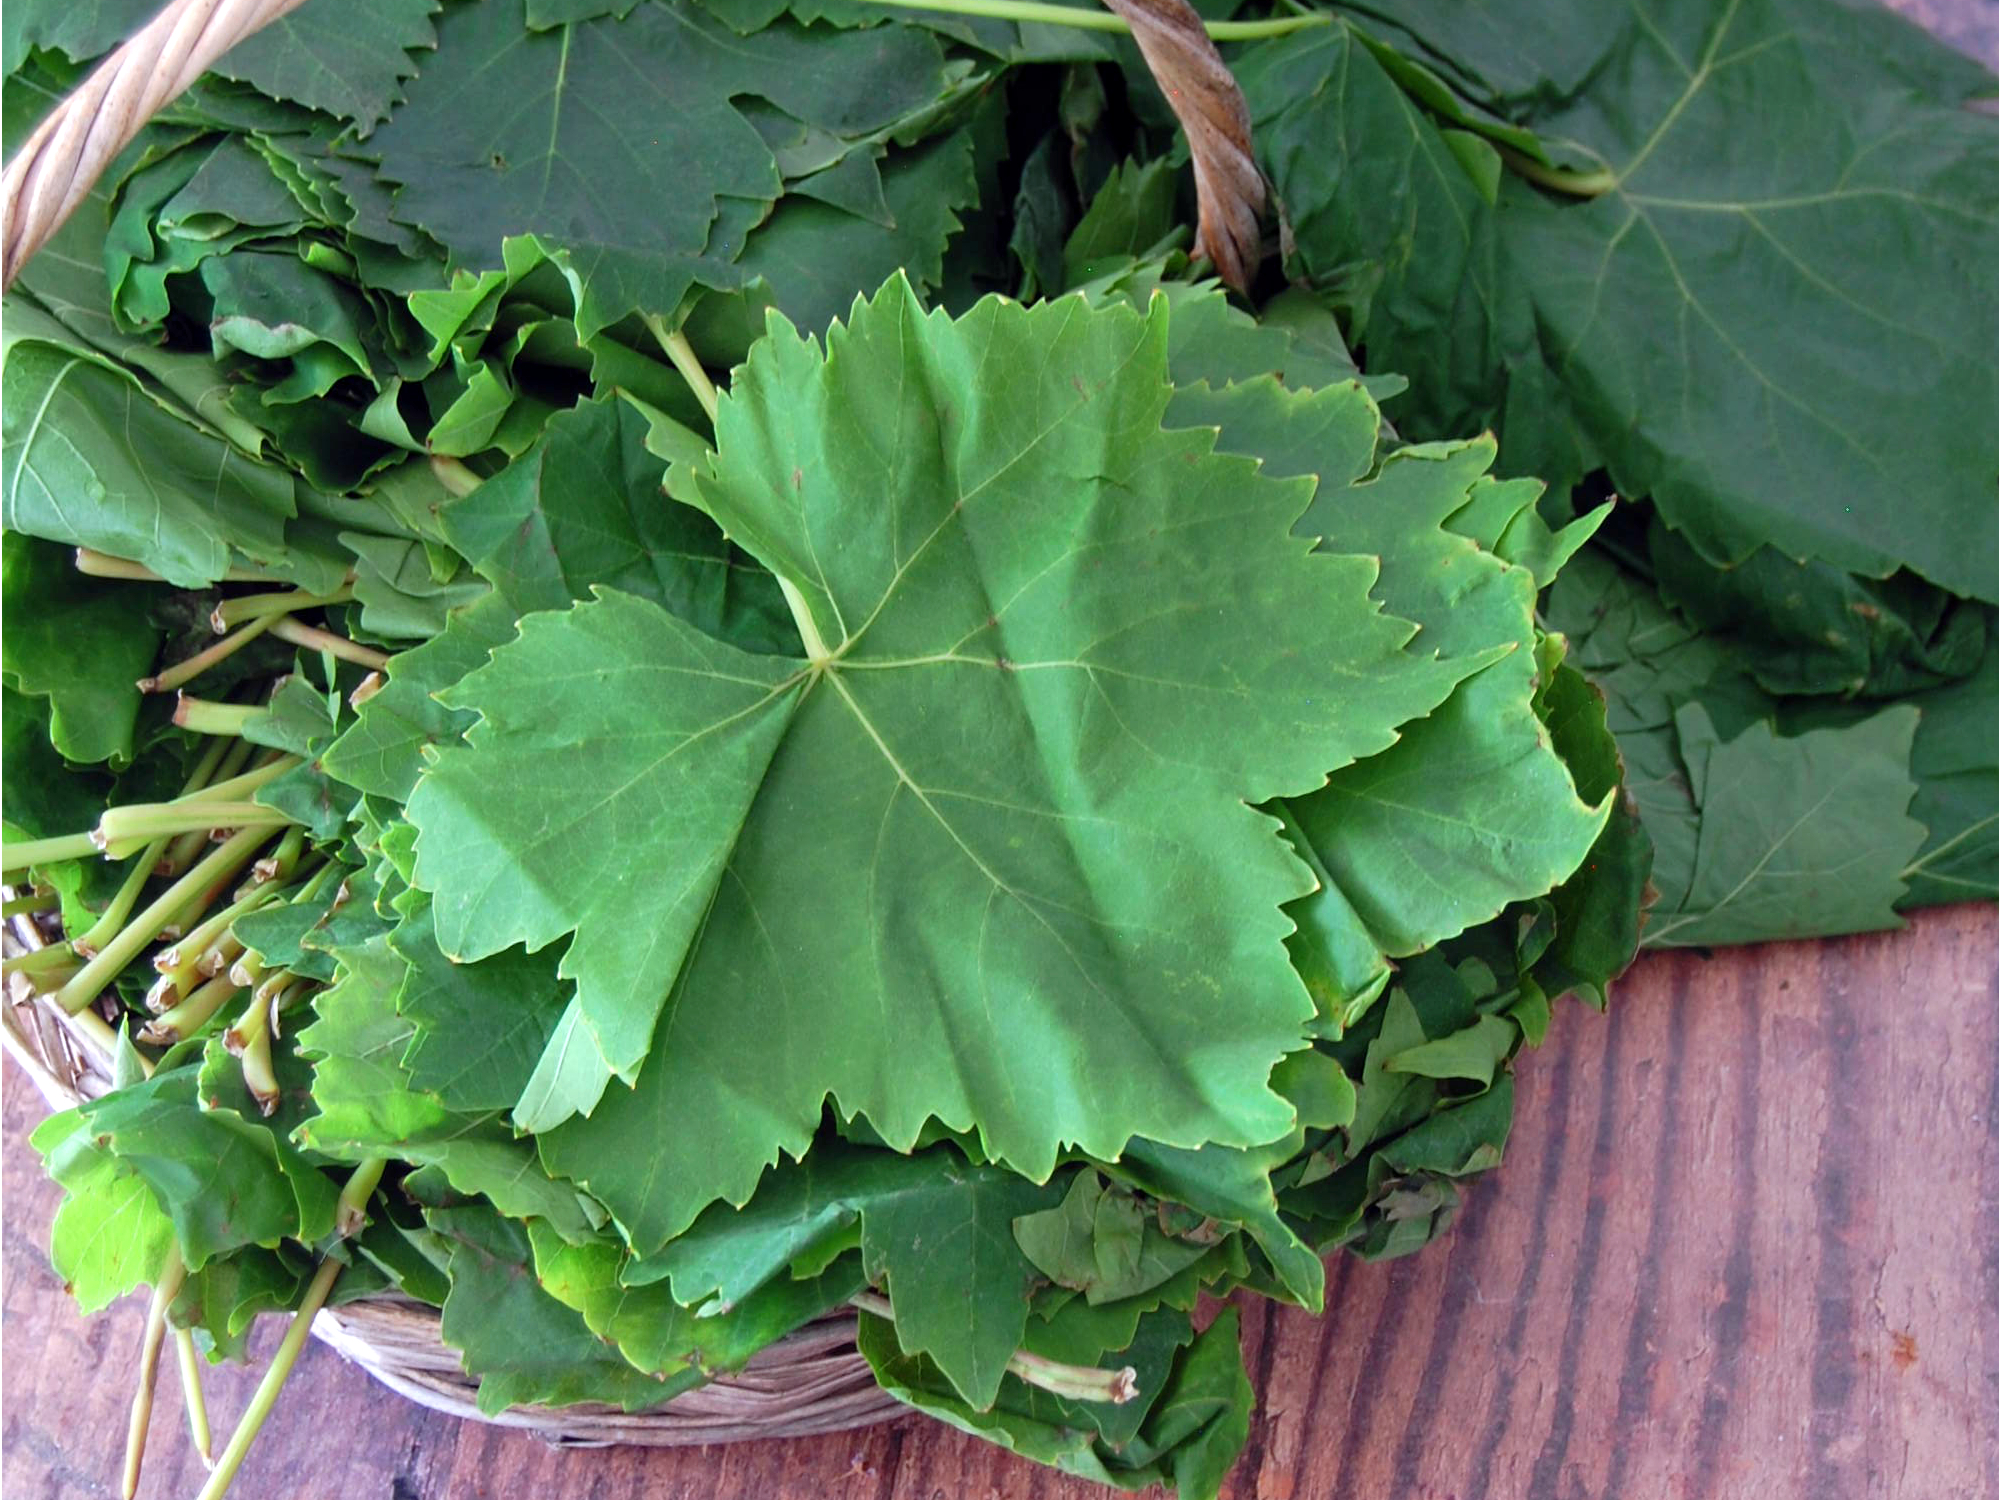 Piled up freshly picked green vine leaves ready for stuffing. In basket